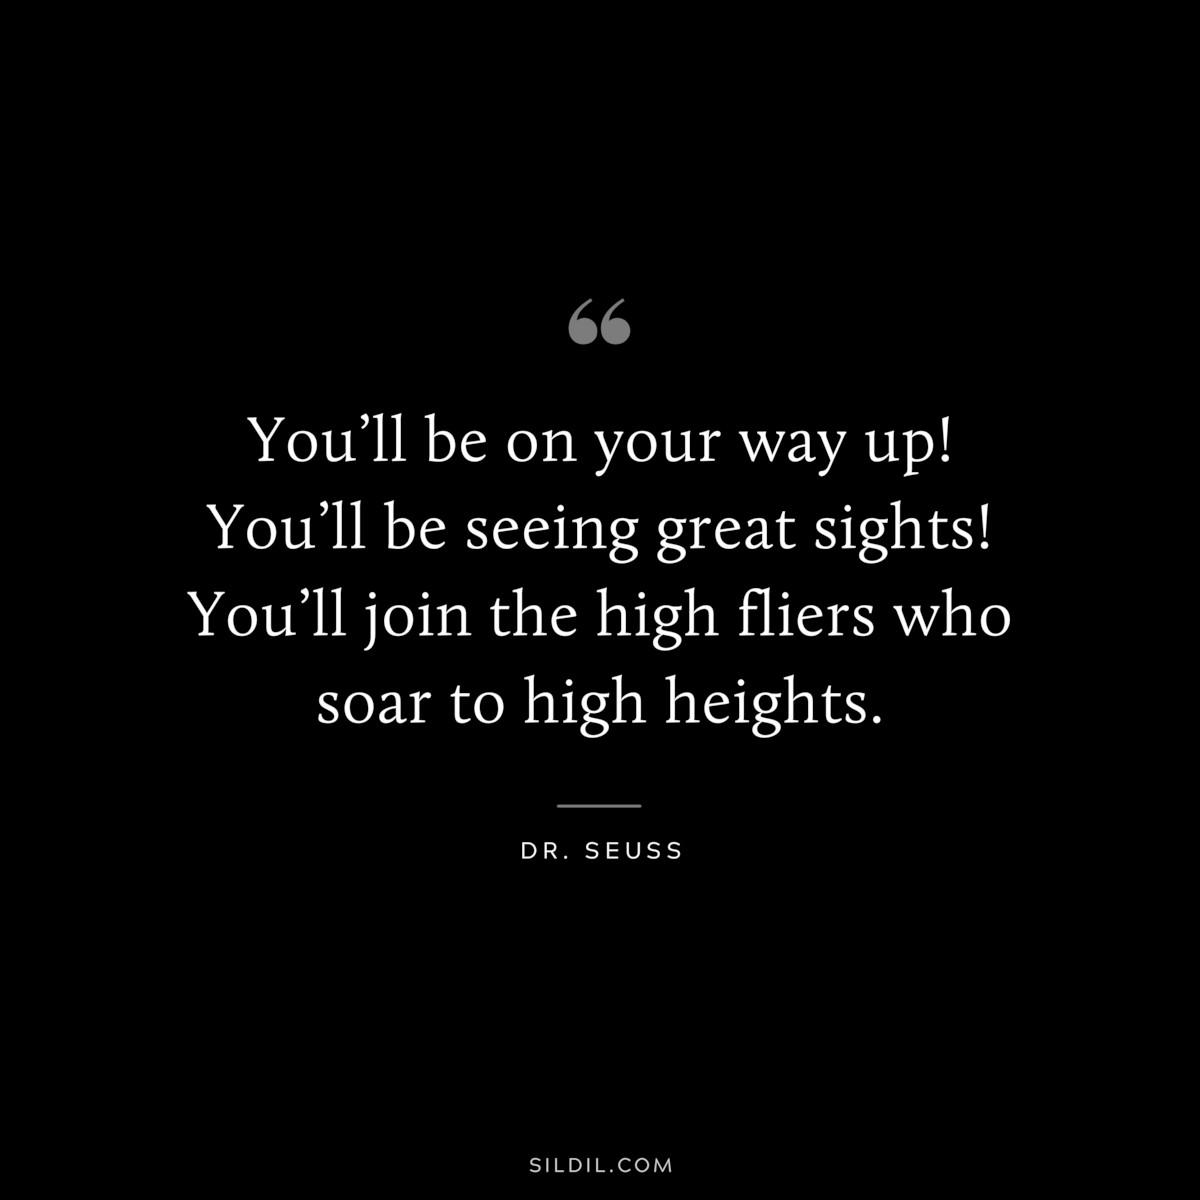 You’ll be on your way up! You’ll be seeing great sights! You’ll join the high fliers who soar to high heights. ― Dr. Seuss